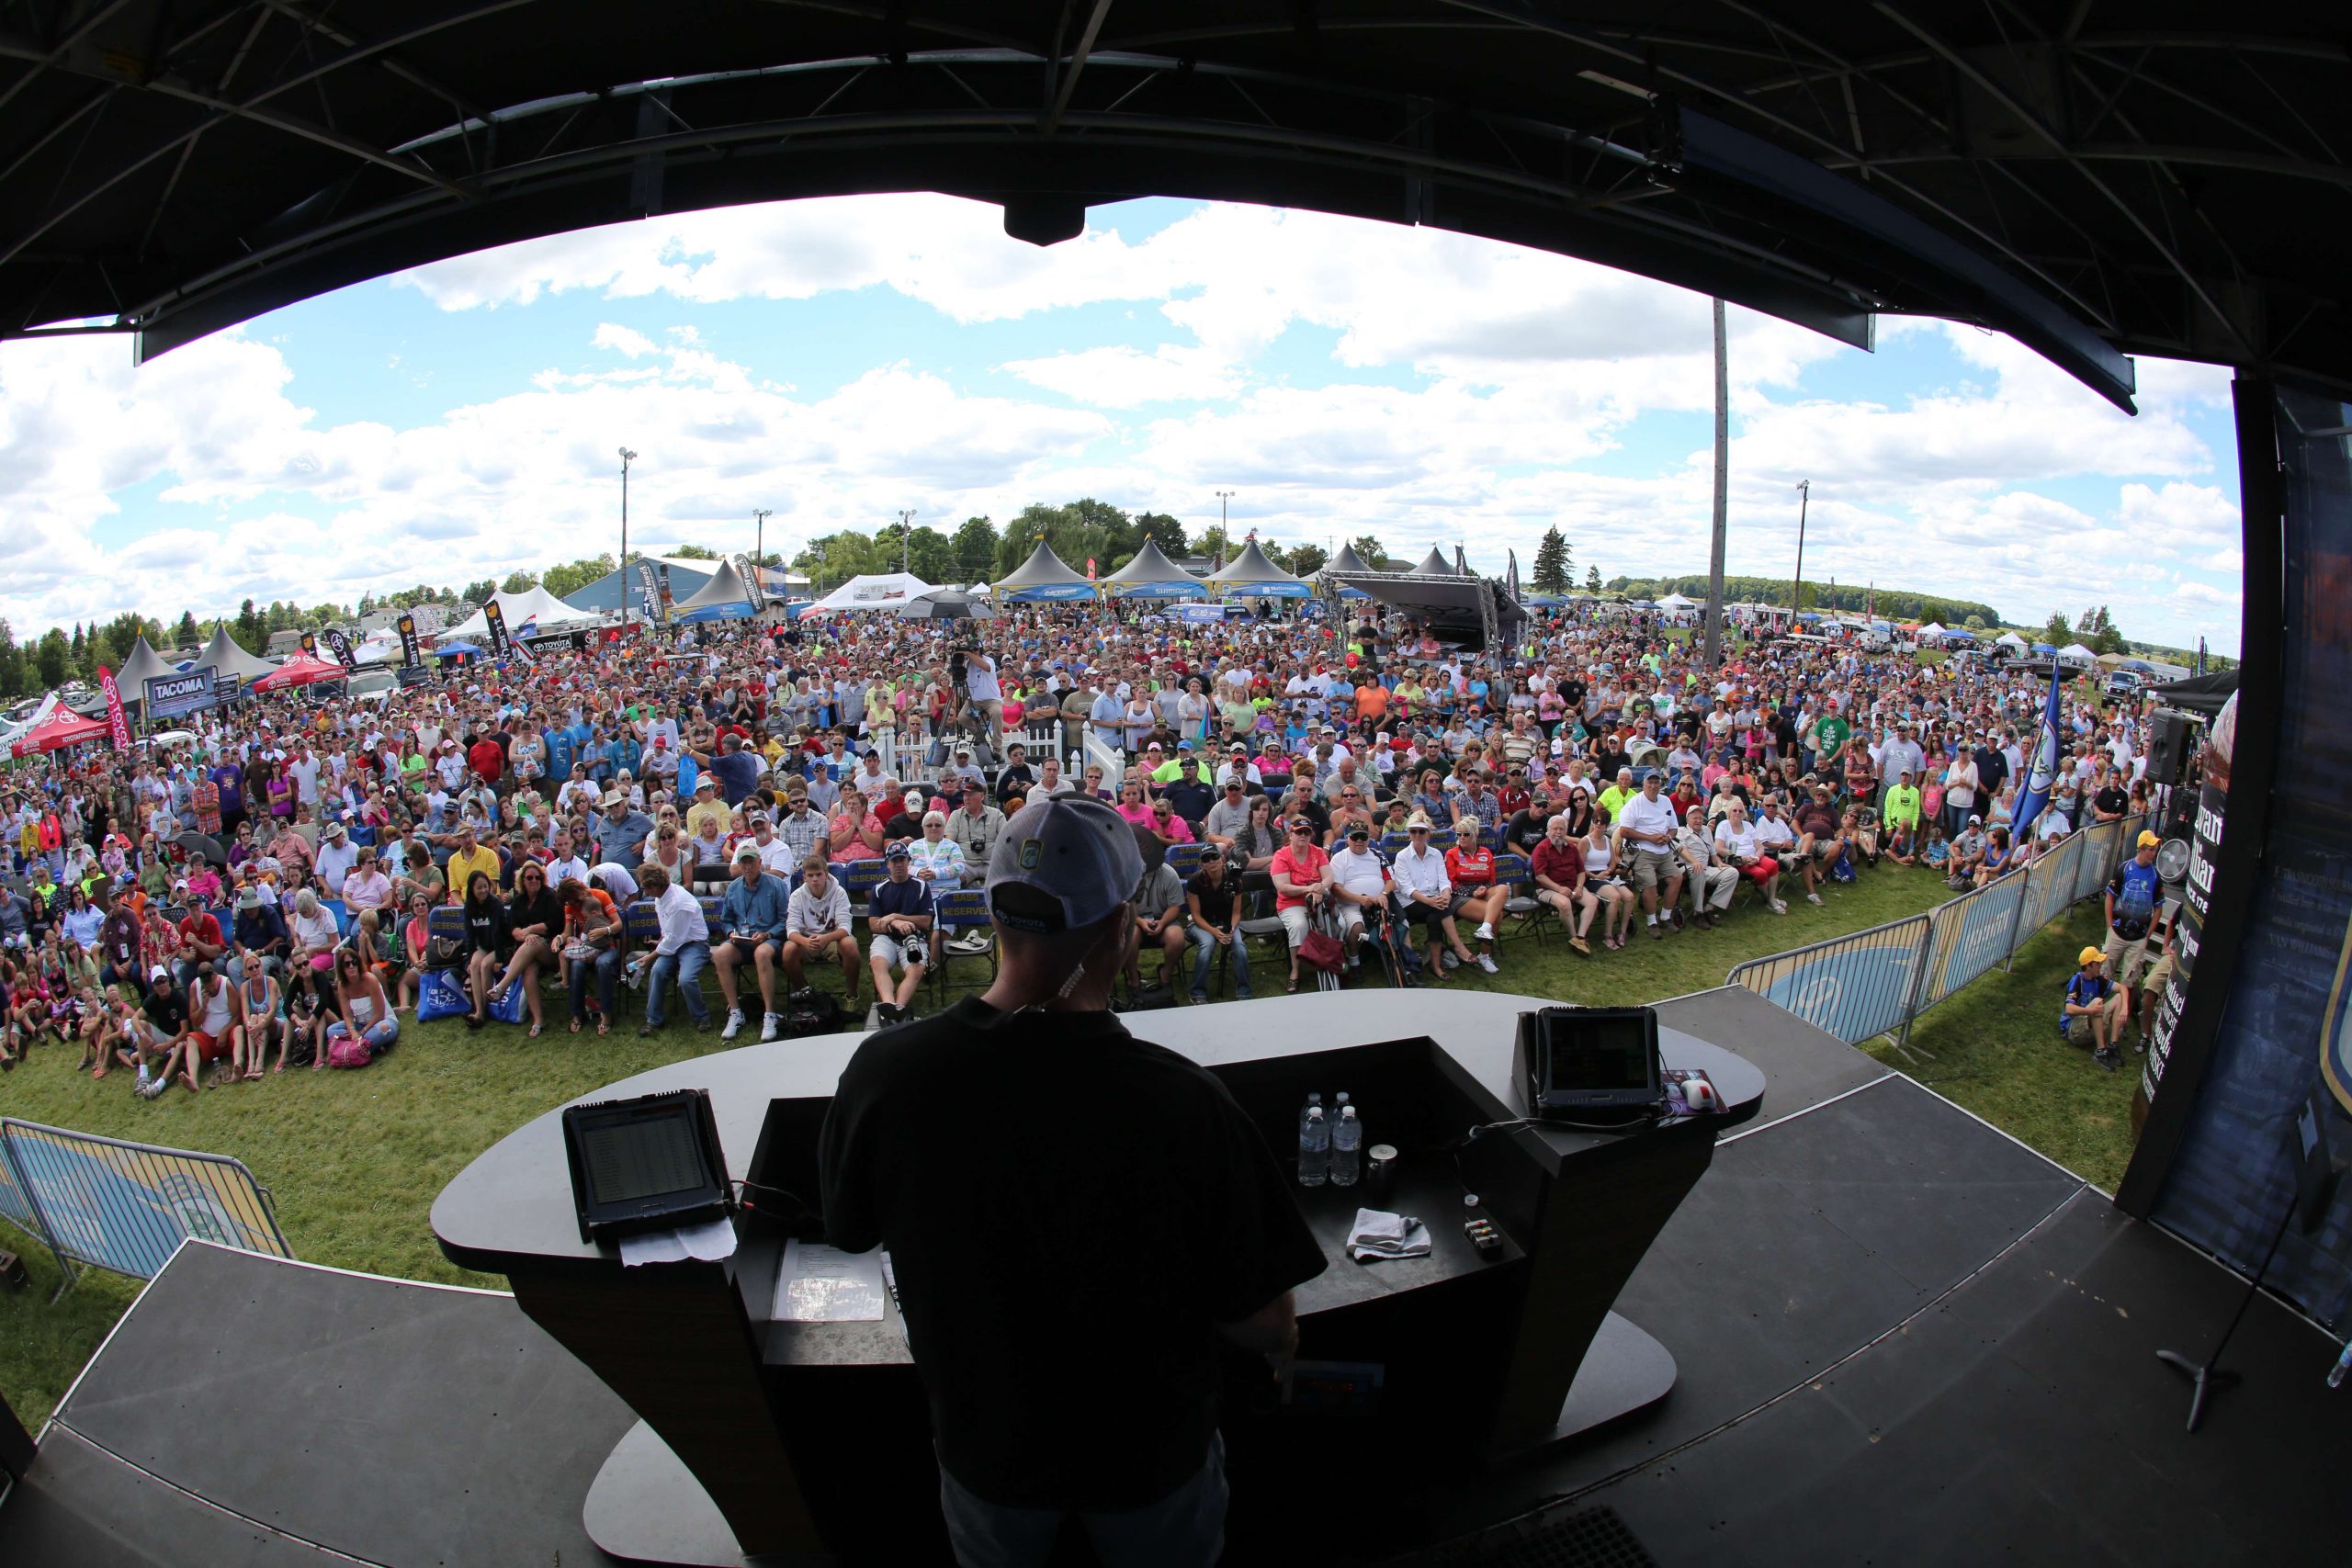 This glimpse of the giant crowd listening to B.A.S.S. emcee Dave Mercer before the 2015 weigh-in should say it all. Waddington always brings out the bass fanatics, and we can't wait to see them again. 